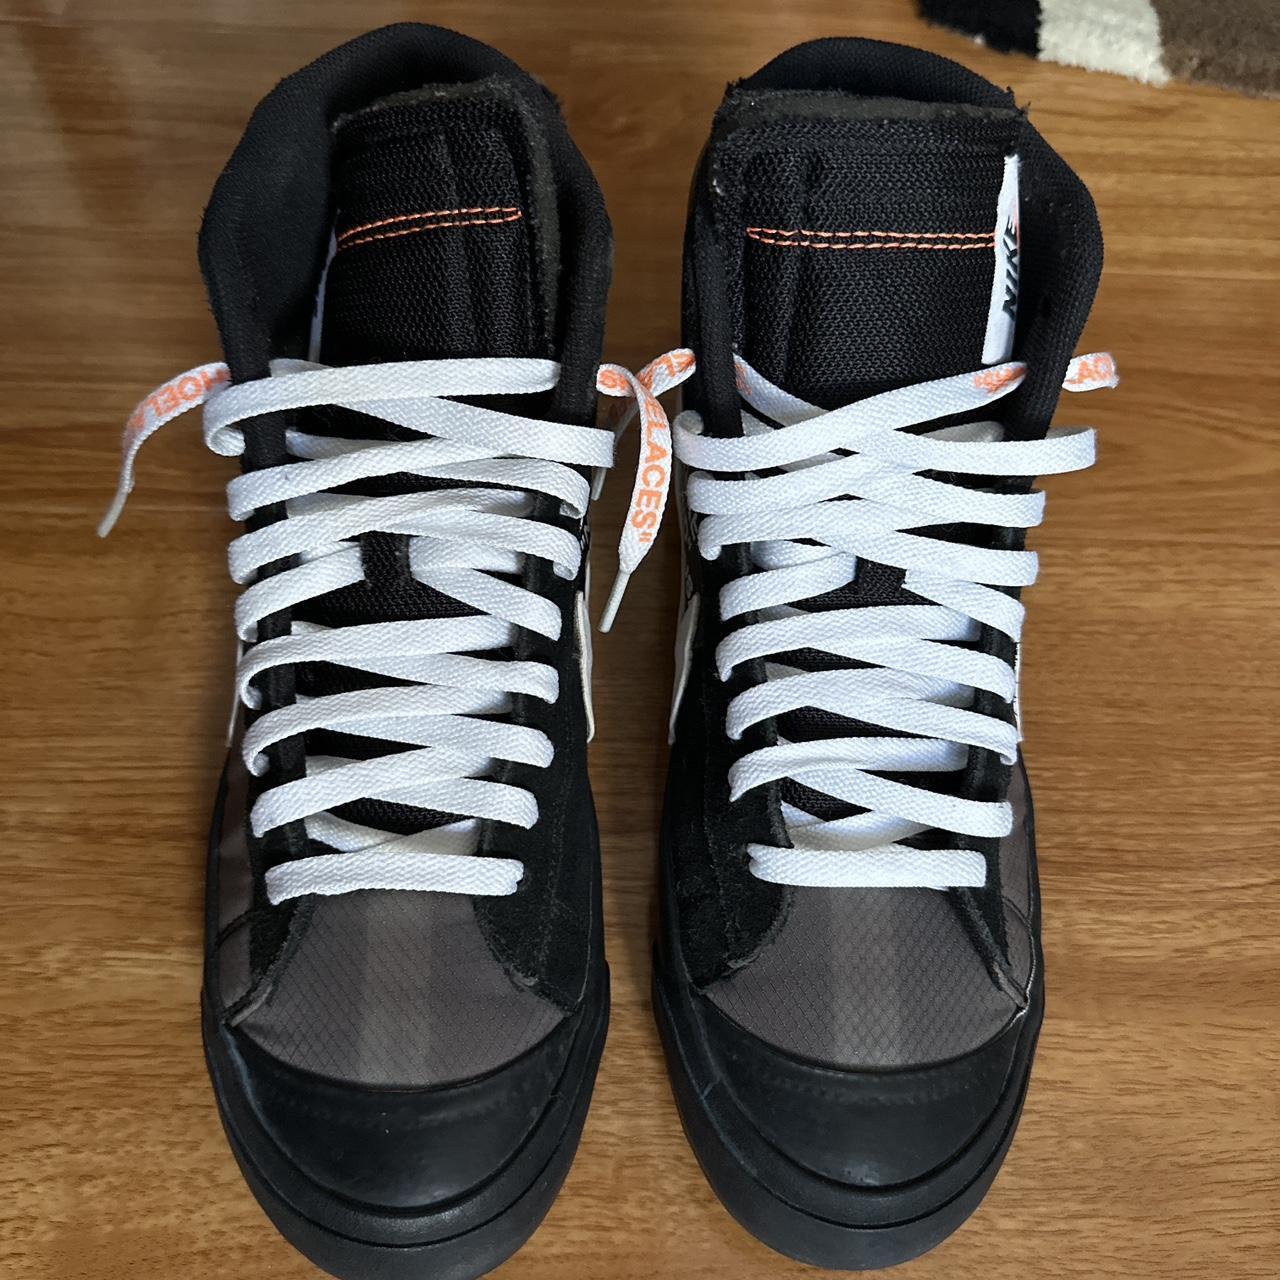 10 Things You Need to Know About the Off-White Nike Blazer Grim Reaper